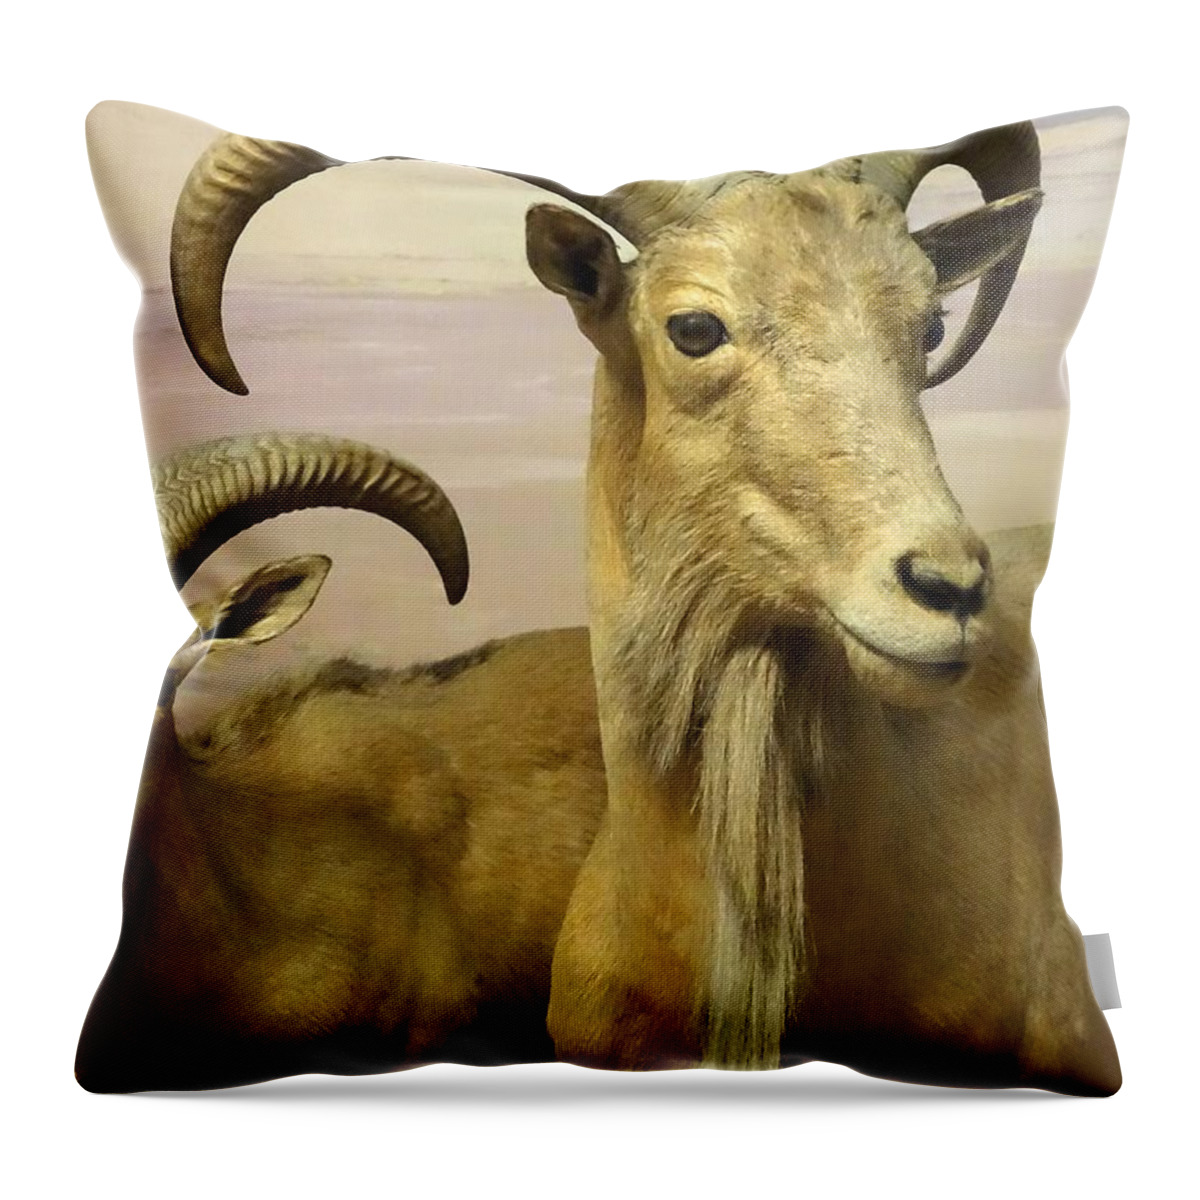 Aoudad Throw Pillow featuring the photograph Aoudad by Cindy Manero